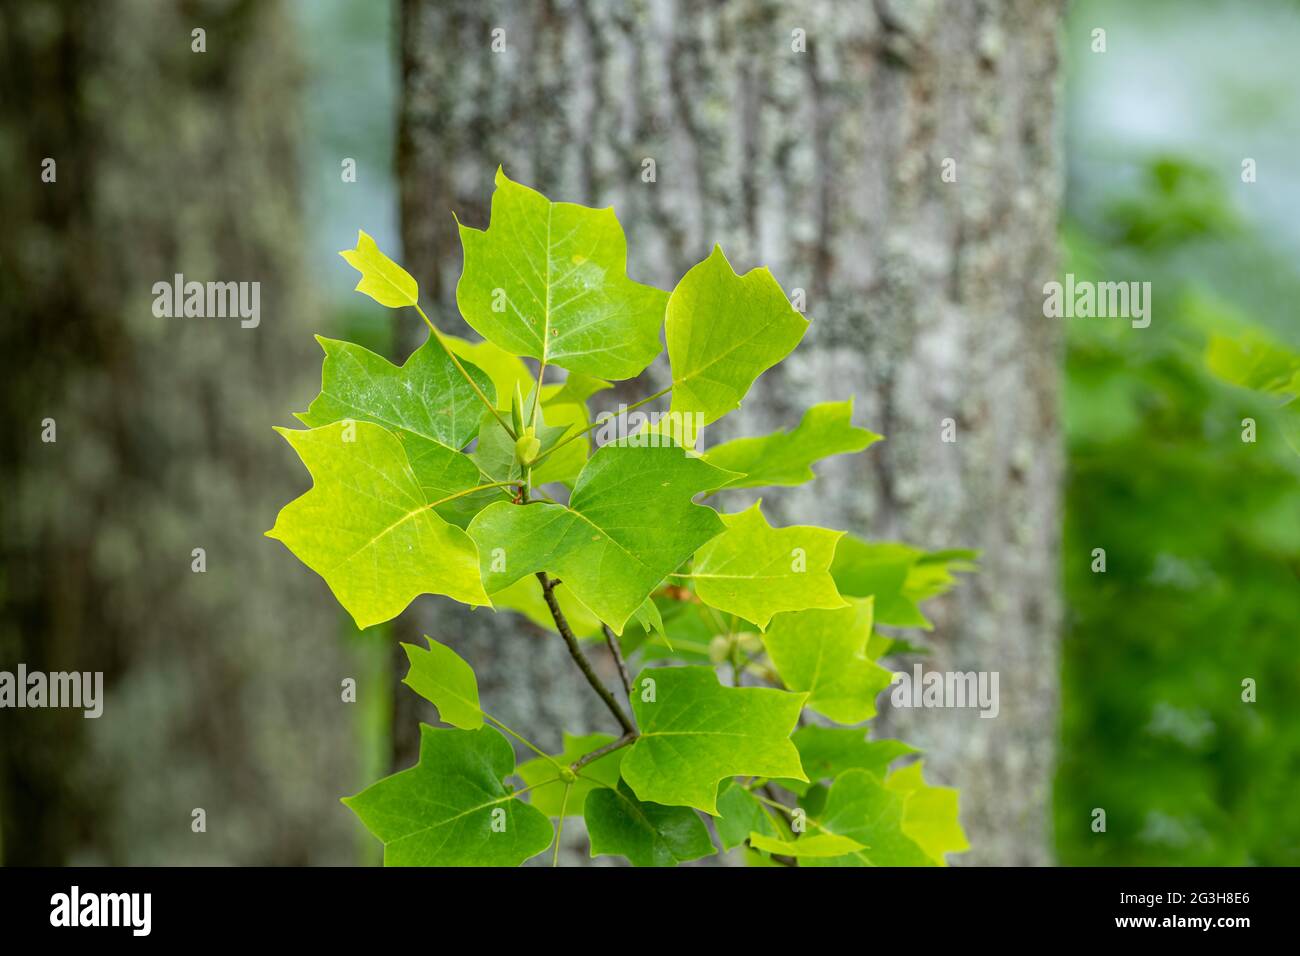 Red oak tree leaves gently framed against a forest backdrop in the Tennessee mountains during a vibrant, healthy spring season. Stock Photo